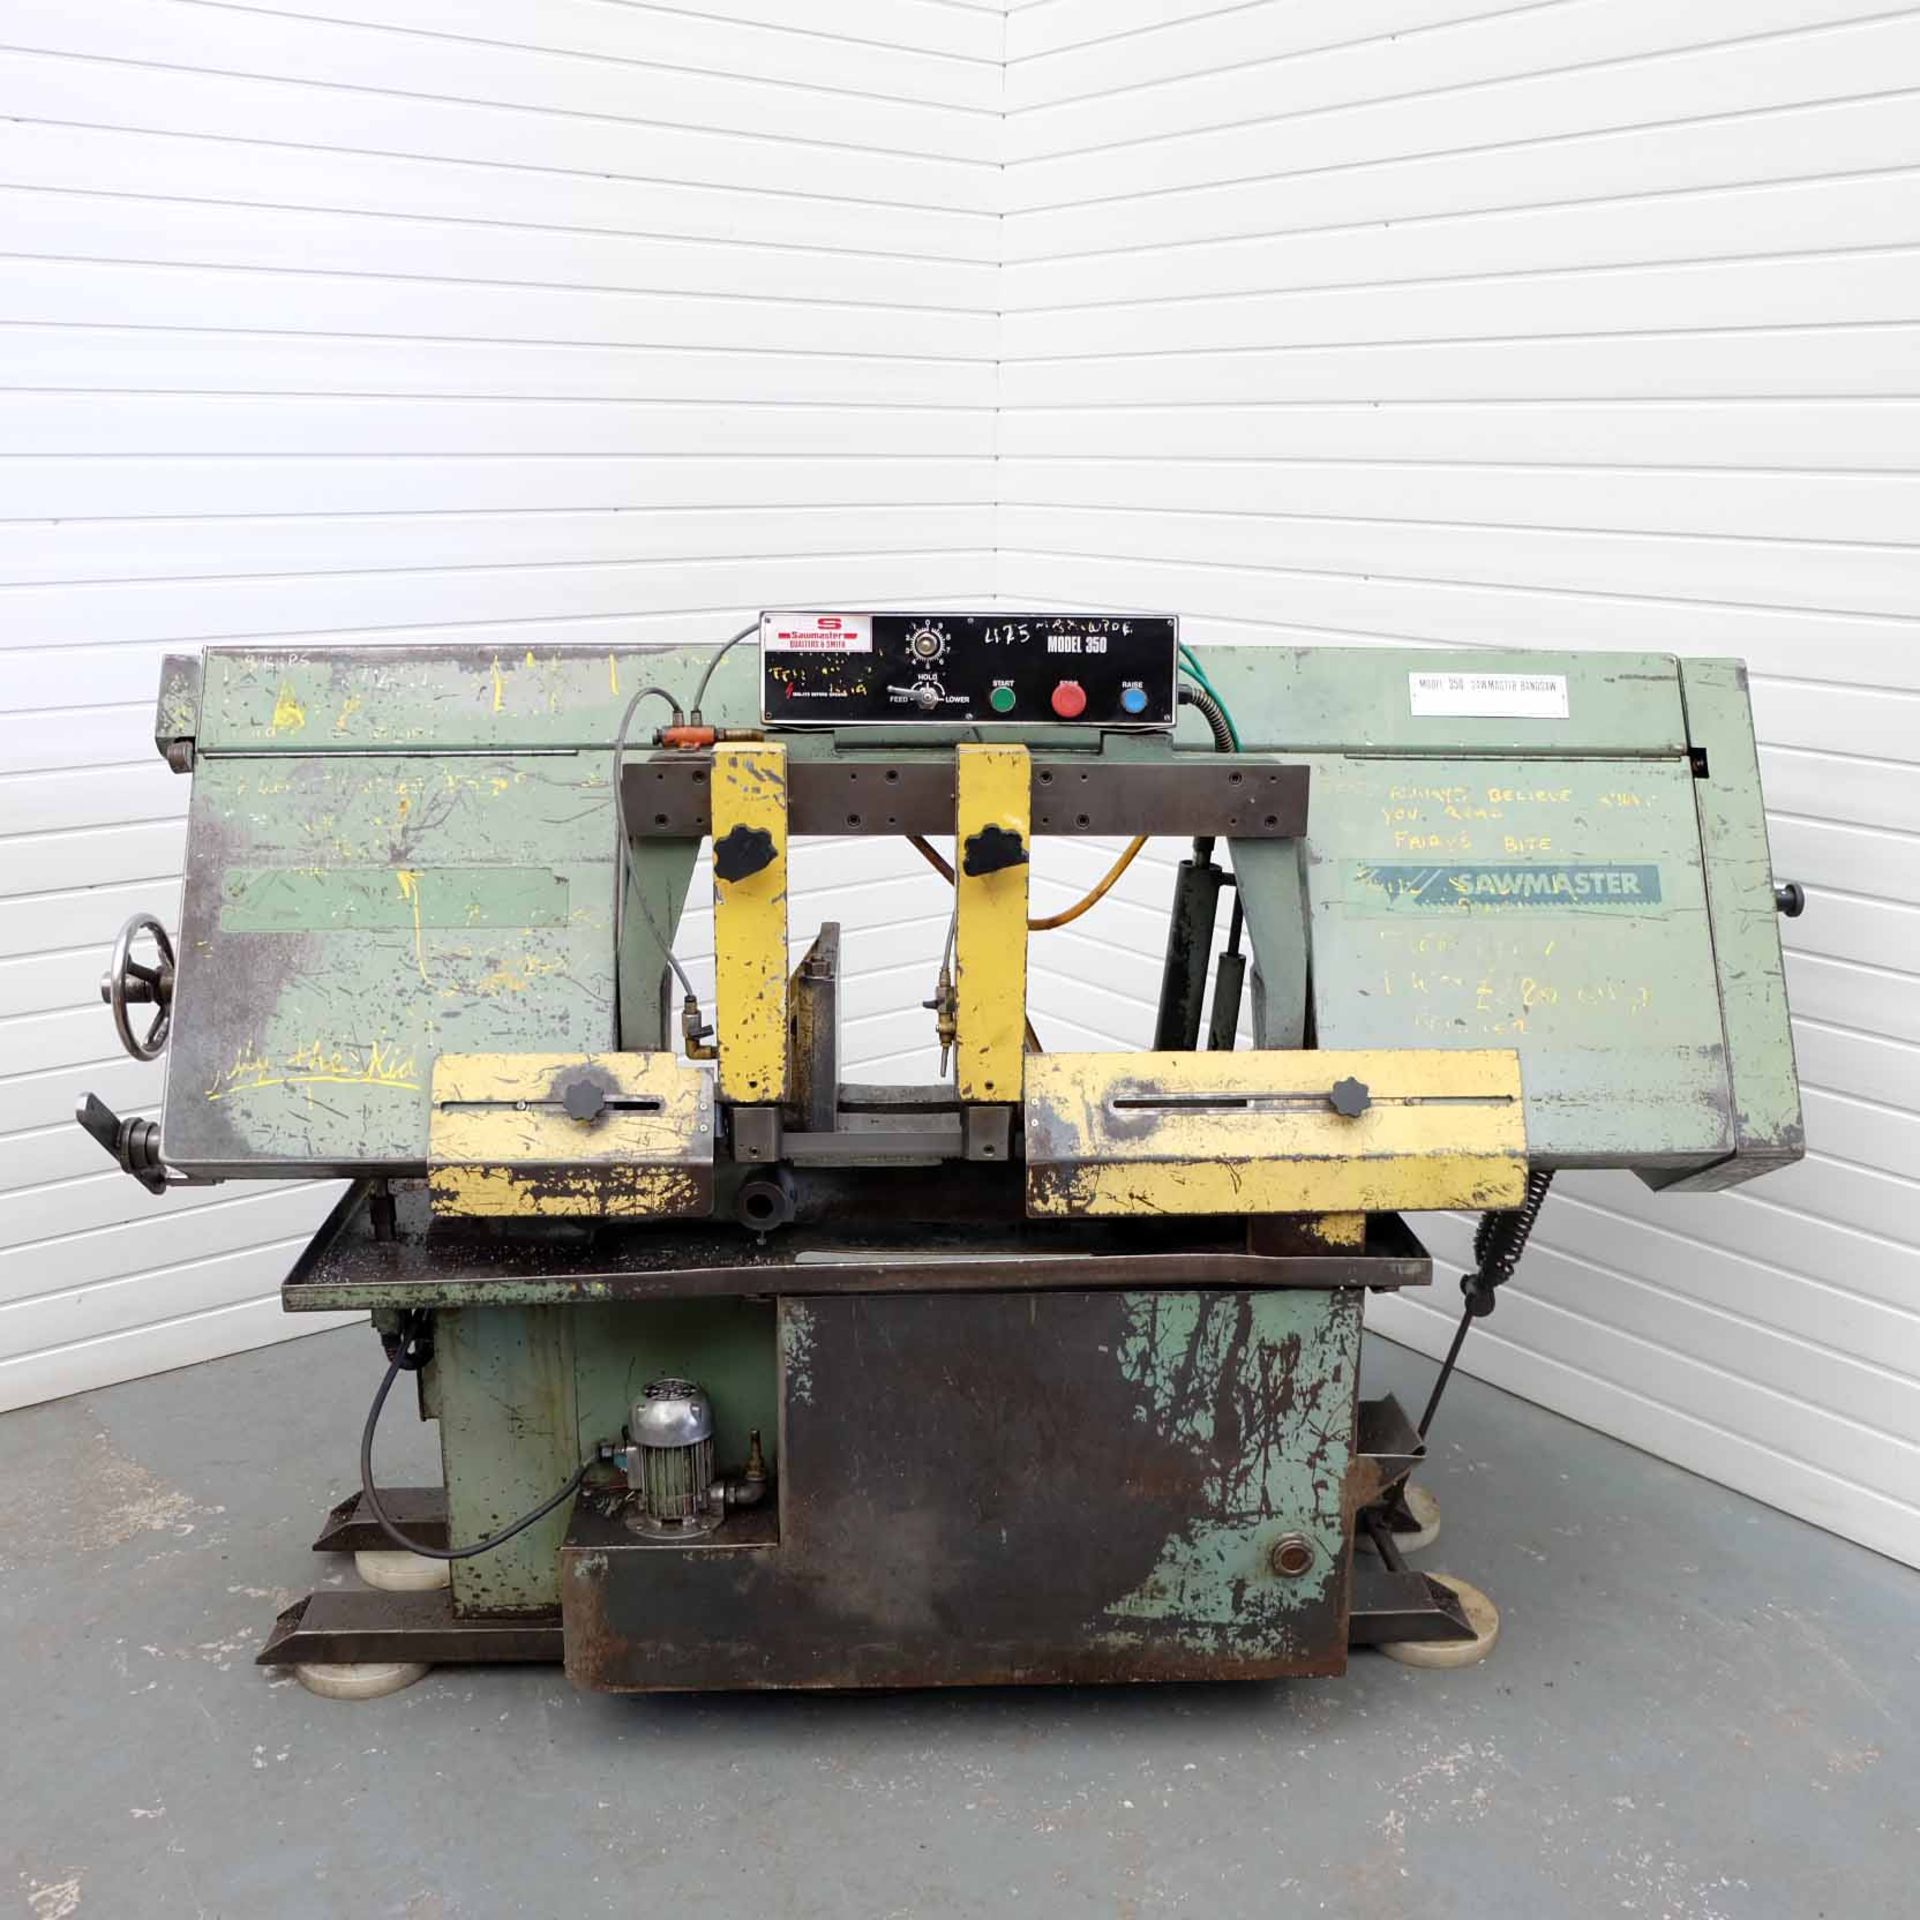 Qualters & Smith Model 350 Sawmaster Horizontal Bandsaw. Capacity 350mm Diameter. Max Vice Opening 5